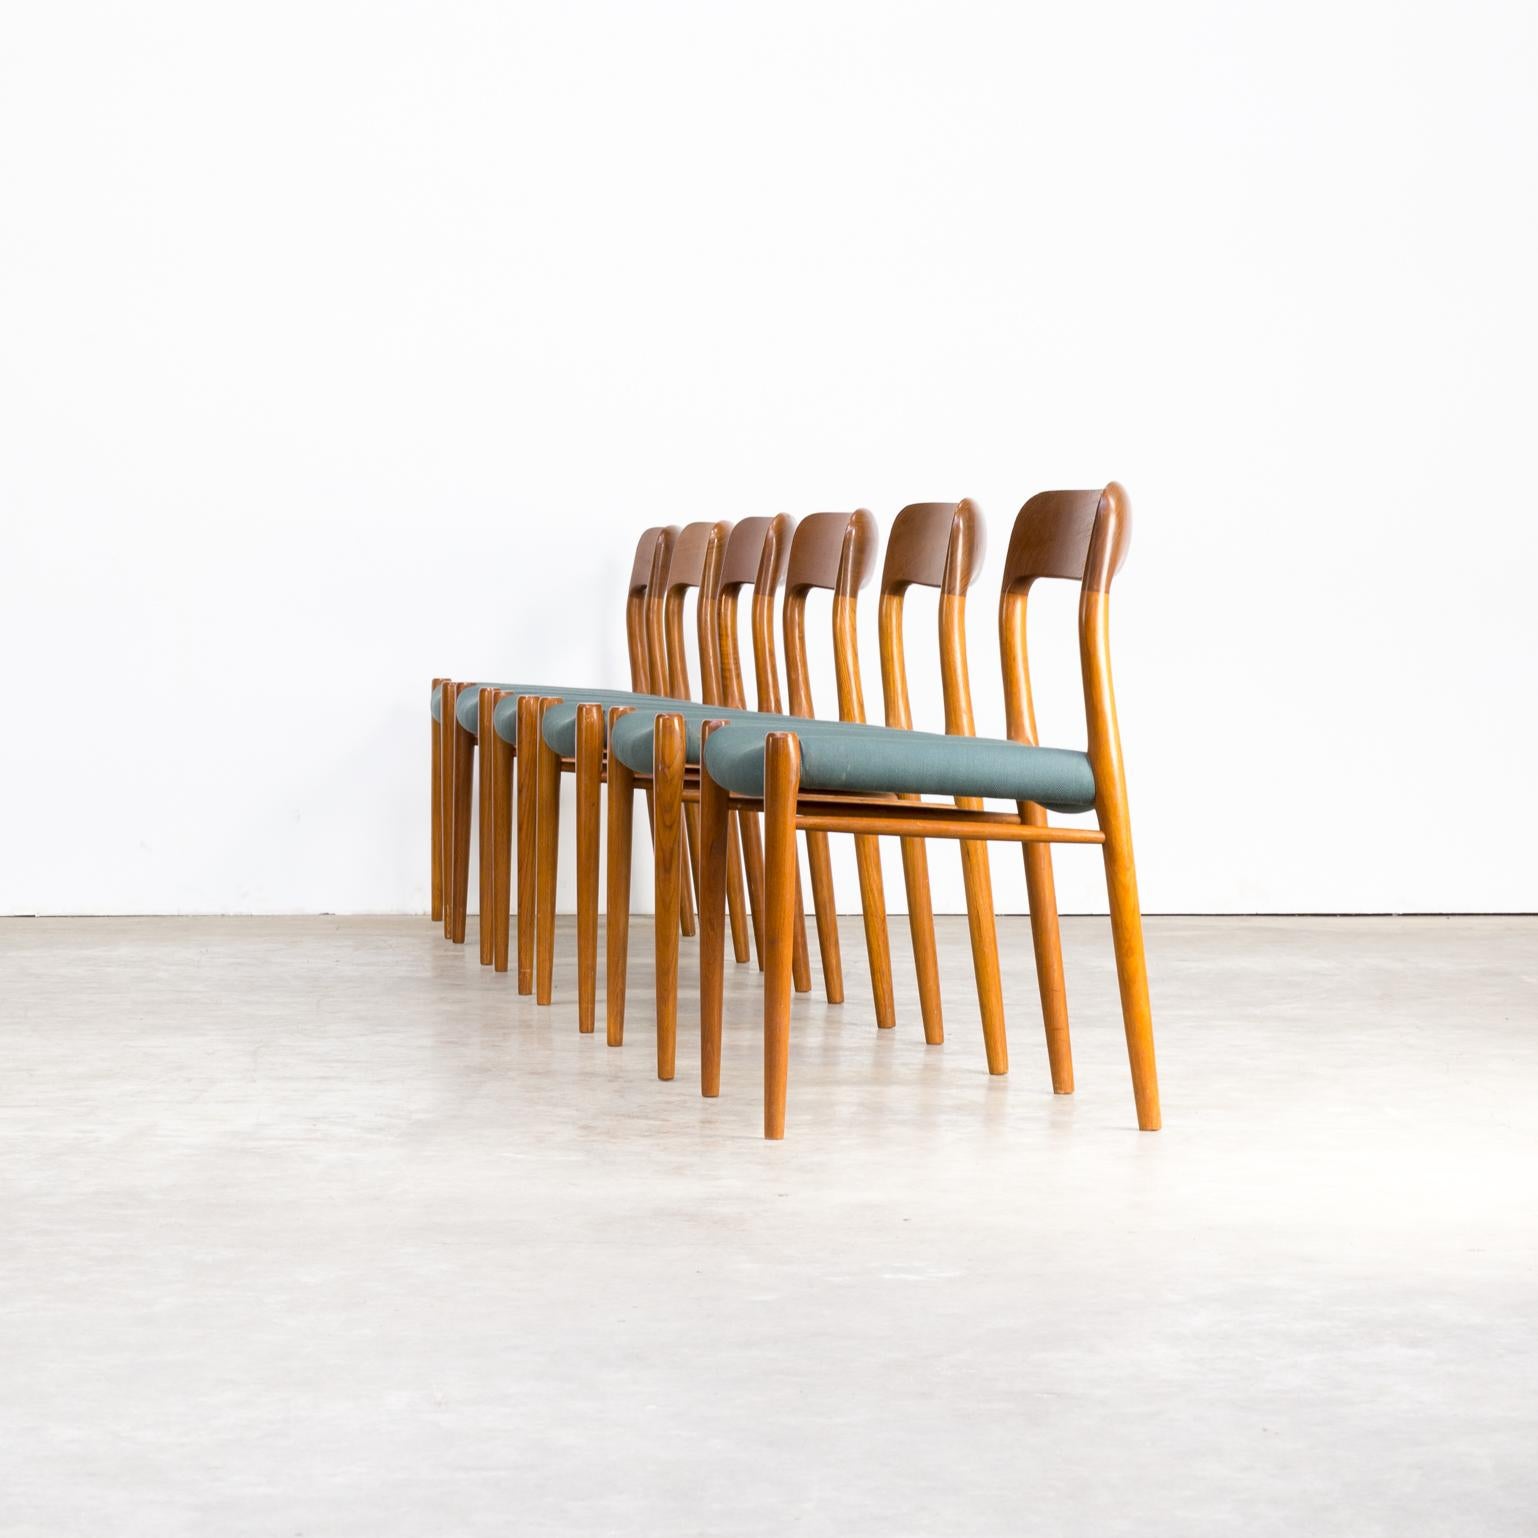 1960s Niels O. Møller model 75 dining chairs for J.L. Møller set of 6. Good condition, consistent with age and use.